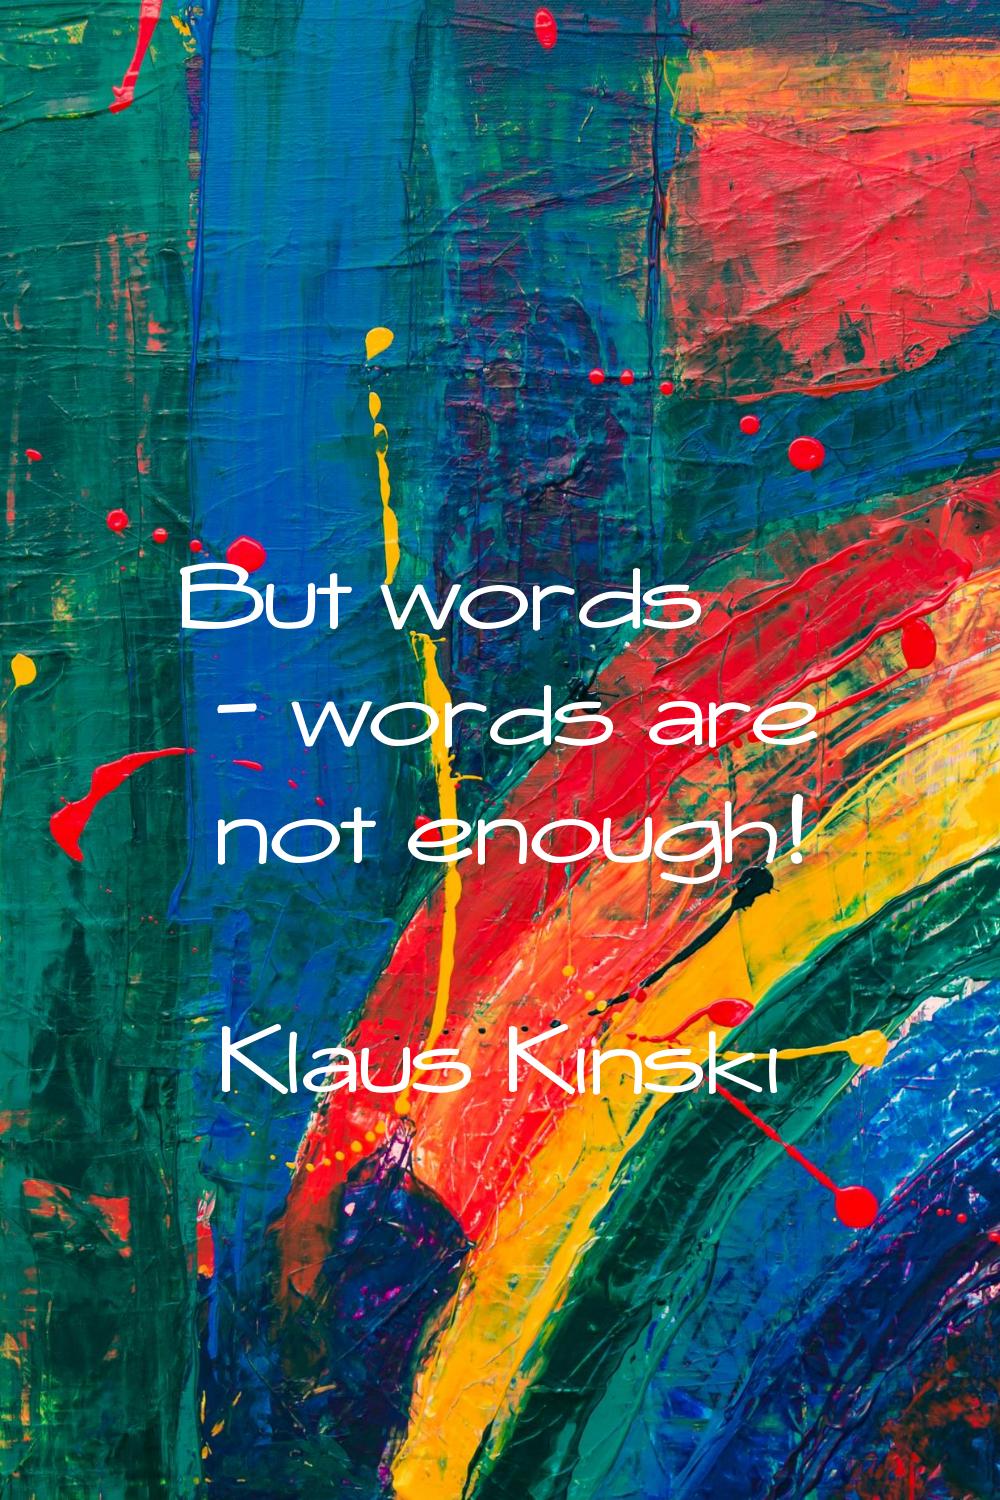 But words - words are not enough!